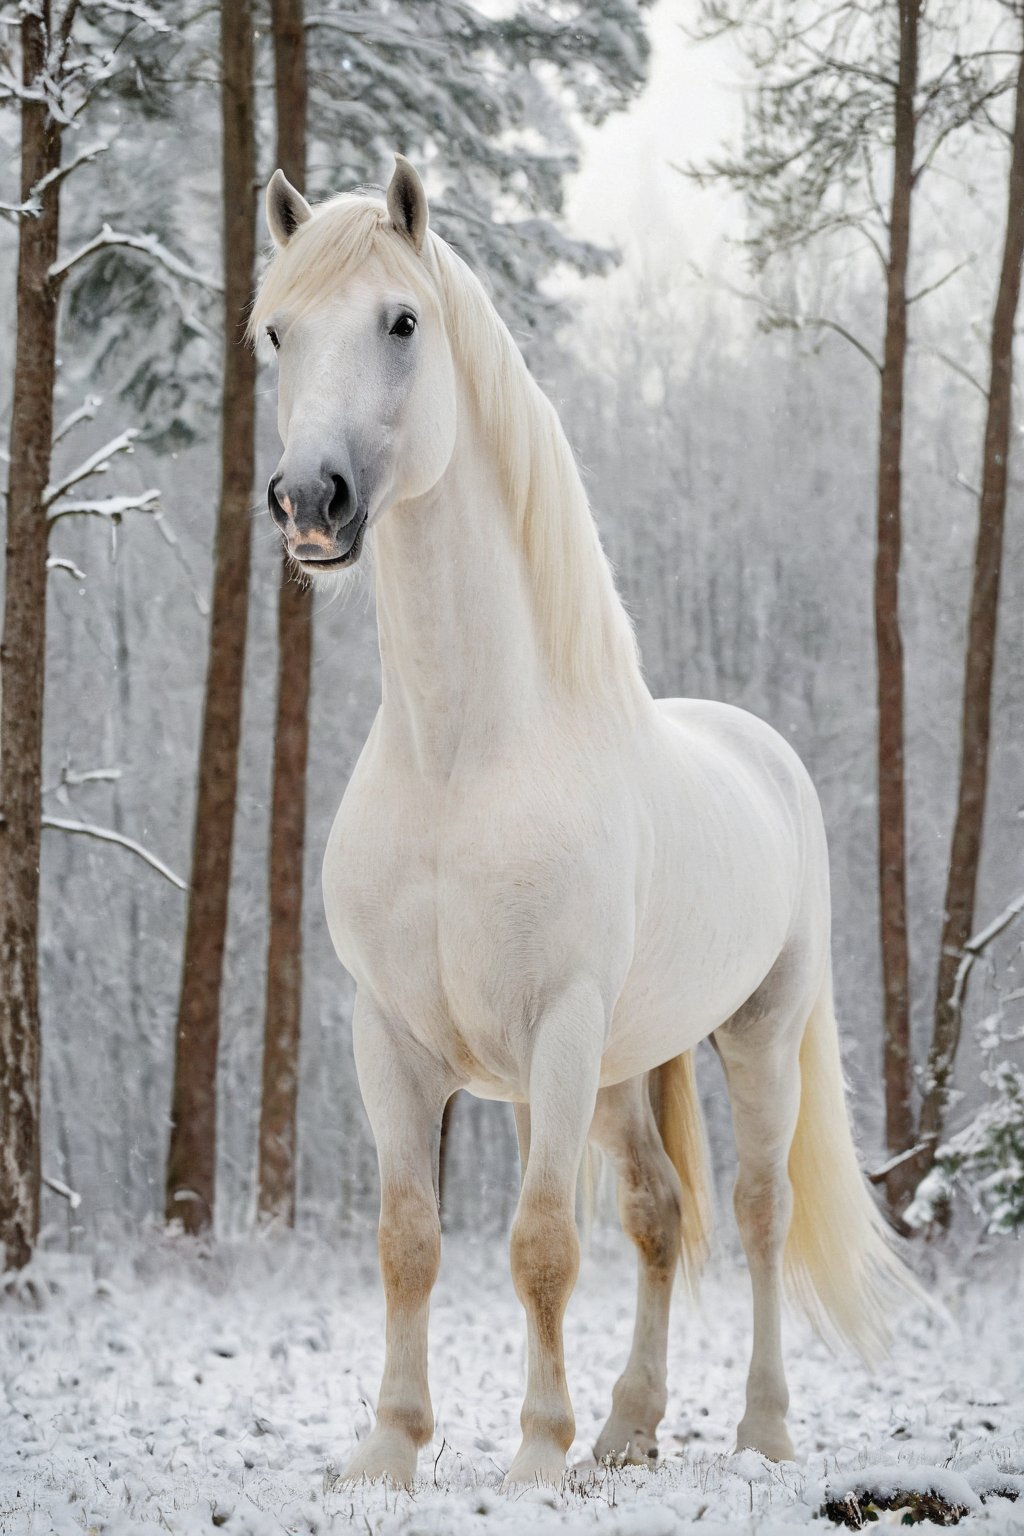 A striking photograph of a majestic white stallion, standing tall amidst the snow-covered tree line of a ridged forest. The early morning sunlight filters through the snow-laden branches, casting a golden glow around the horse. The horse's breath creates visible steam in the cold air, adding to the frosty atmosphere. The overall tone of the image is serene, capturing the essence of a fresh, beautiful winter day., photo